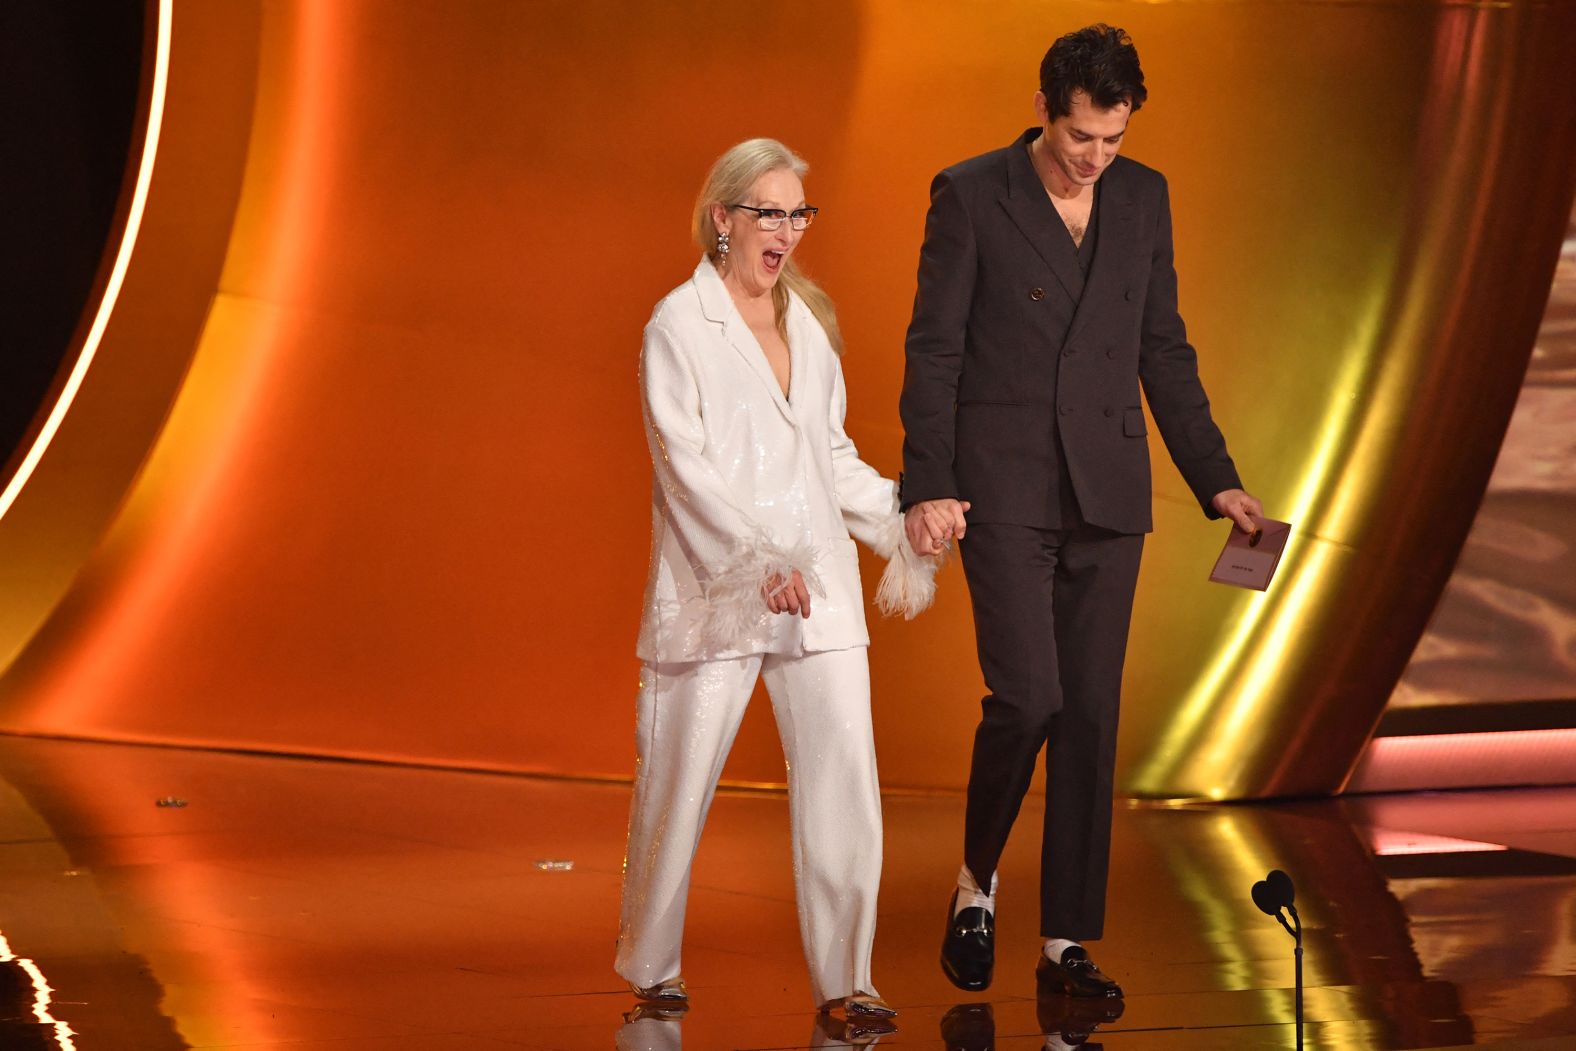 Actress Meryl Streep and her son-in-law, musician Mark Ronson, walk on stage to present the Grammy for record of the year.